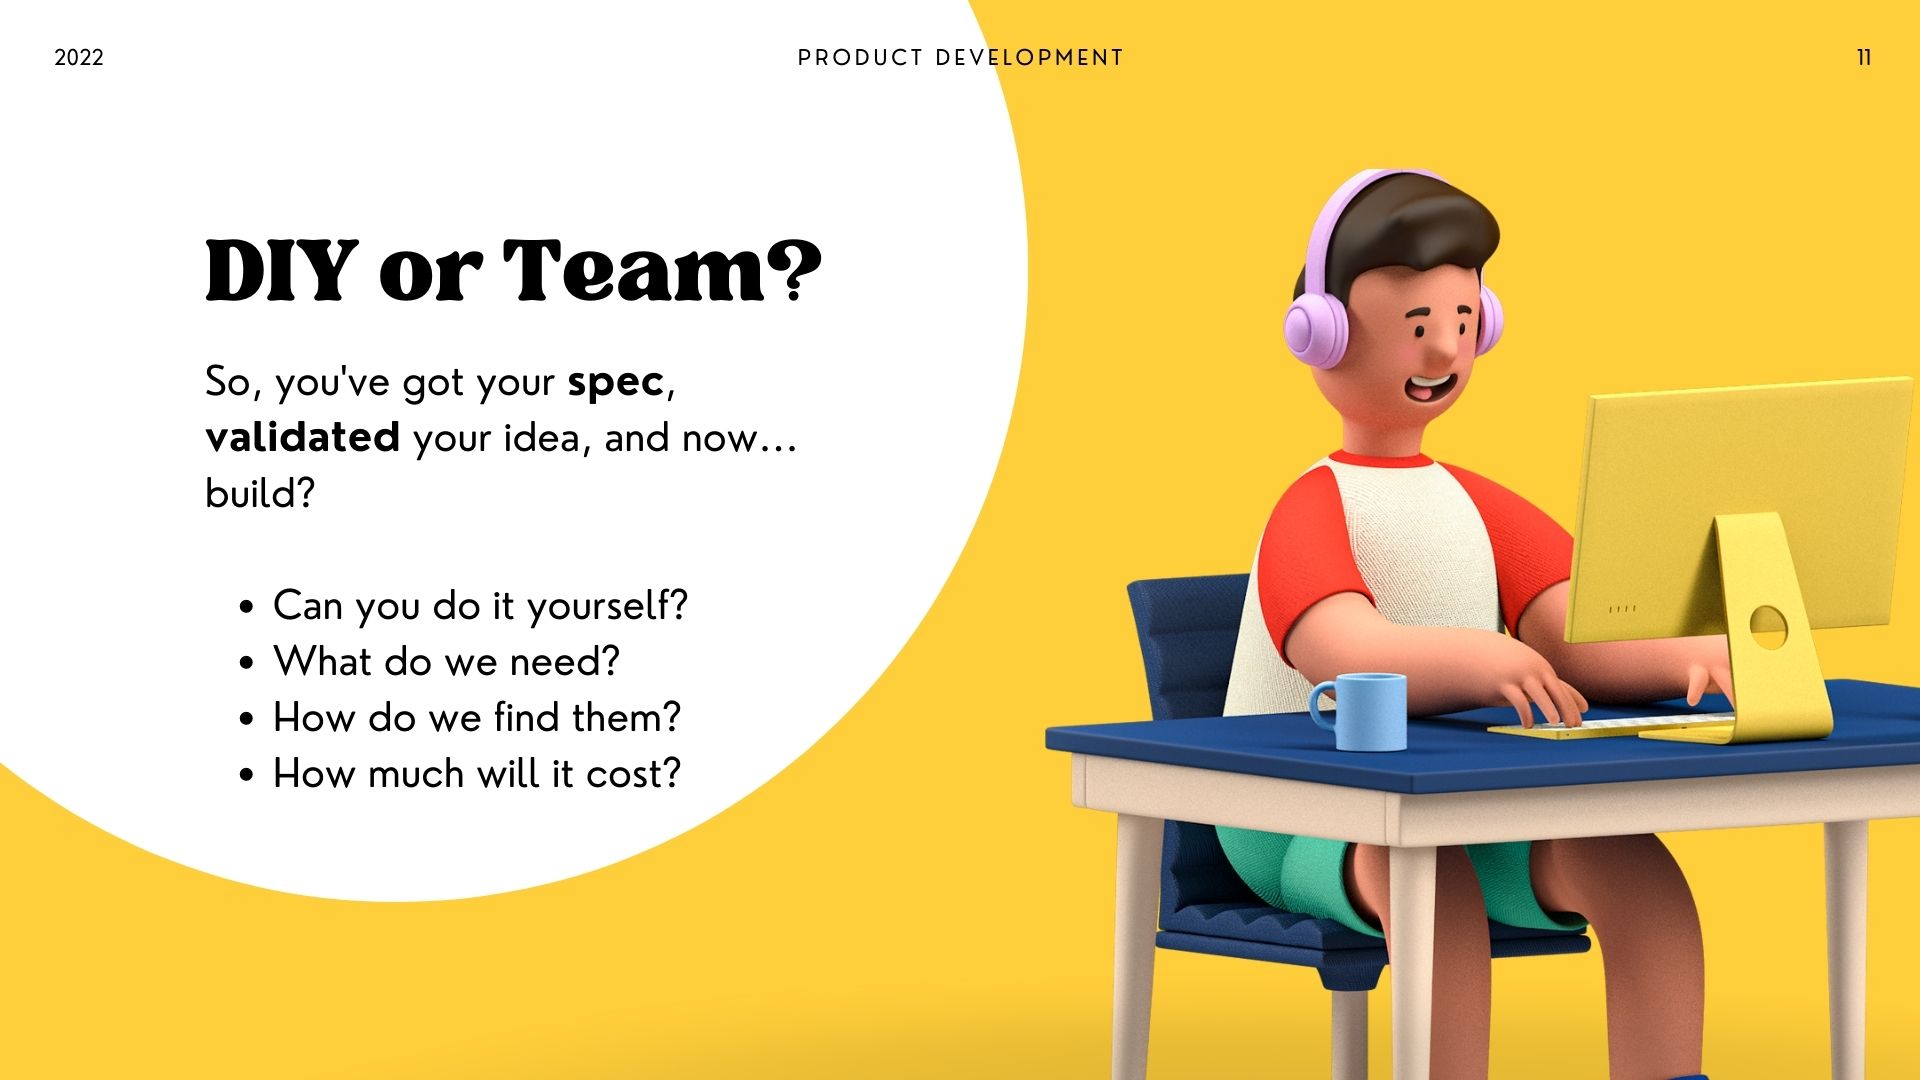 An image asking if DIY or getting a team will help you develop your product